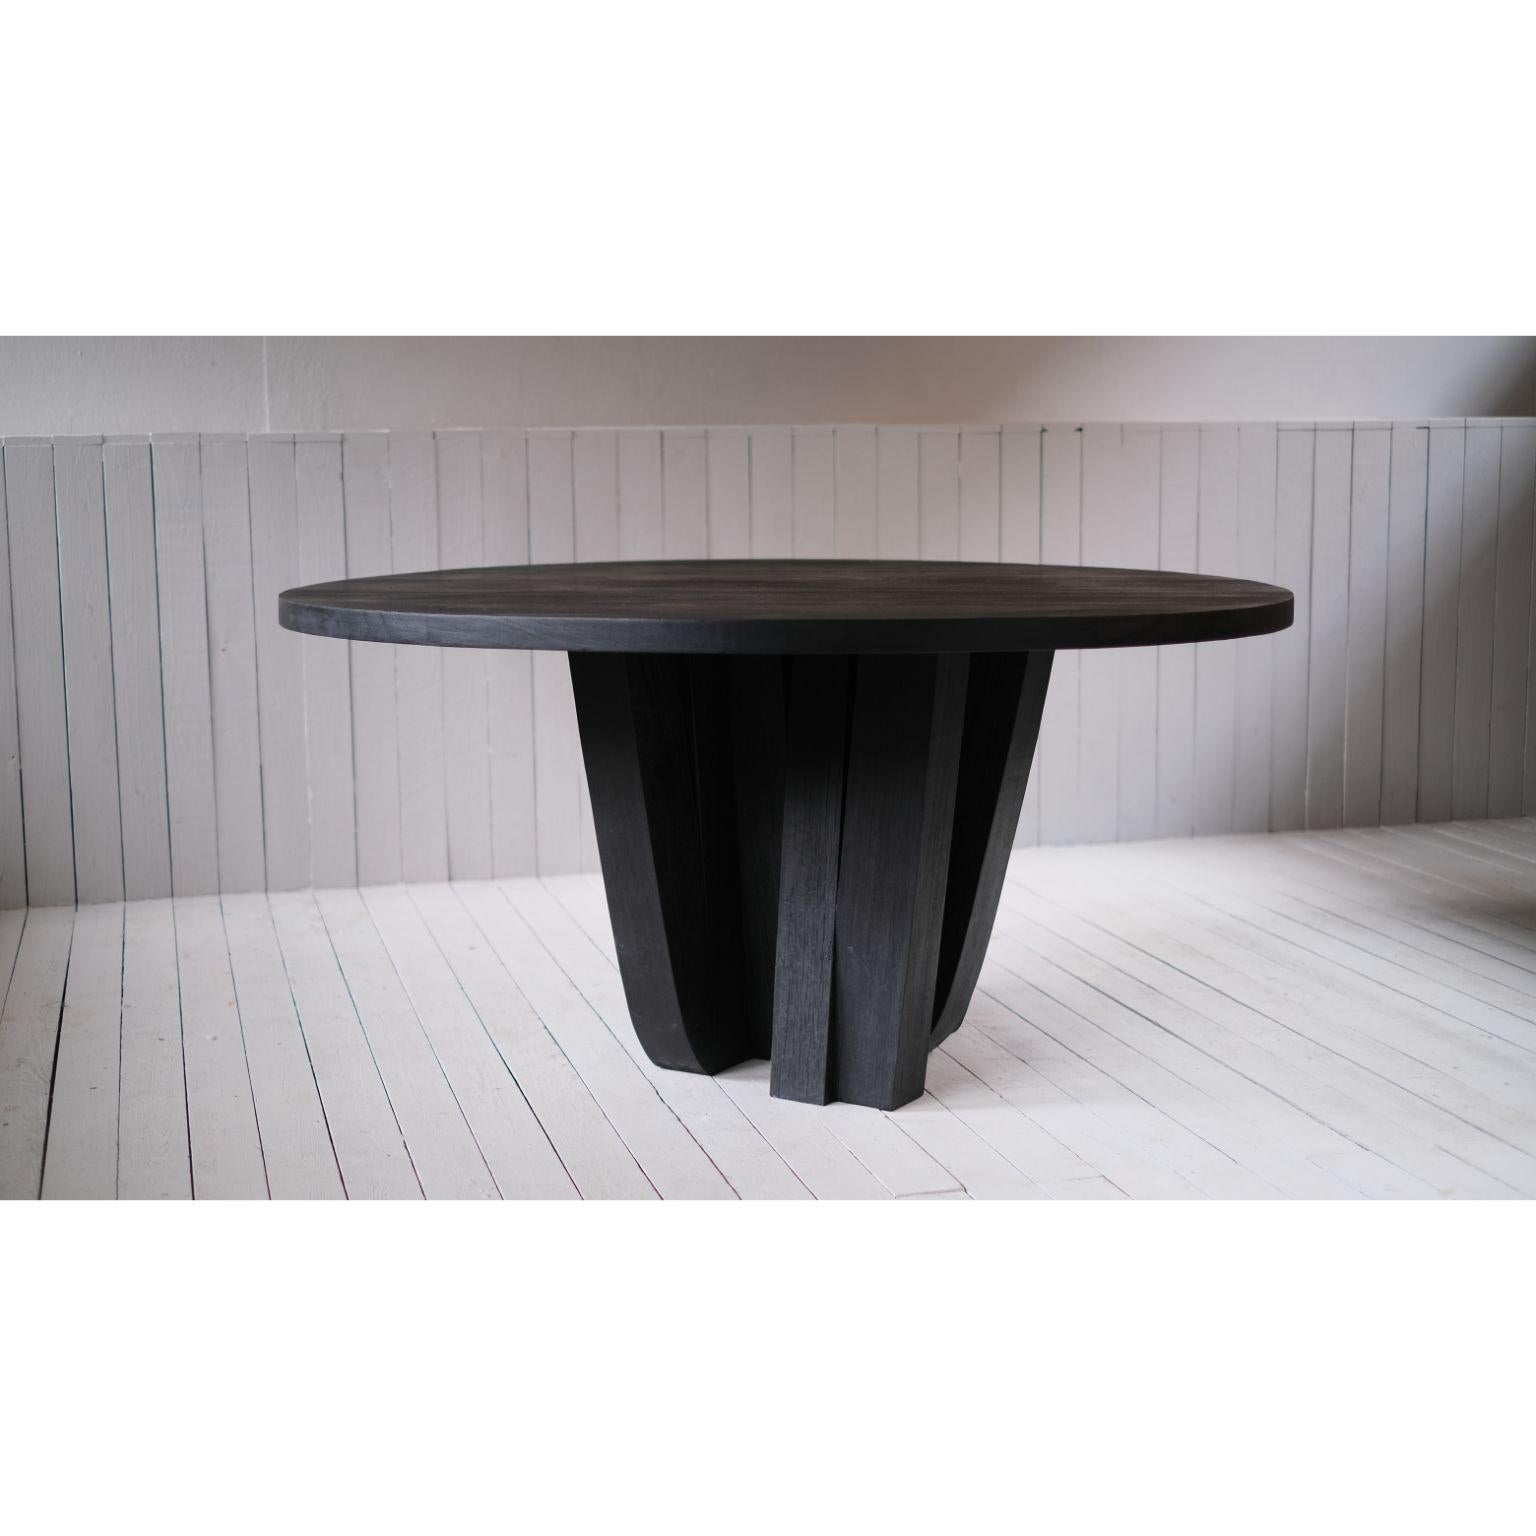 Zoumey table round small by Arno Declercq
Dimensions: D160 x H70 cm
Materials: Burned and waxed Iroko wood.
Signed by Arno Declercq

**They come without a table top.

A forest of table legs made out of 16 solid pieces of Iroko wood, burned